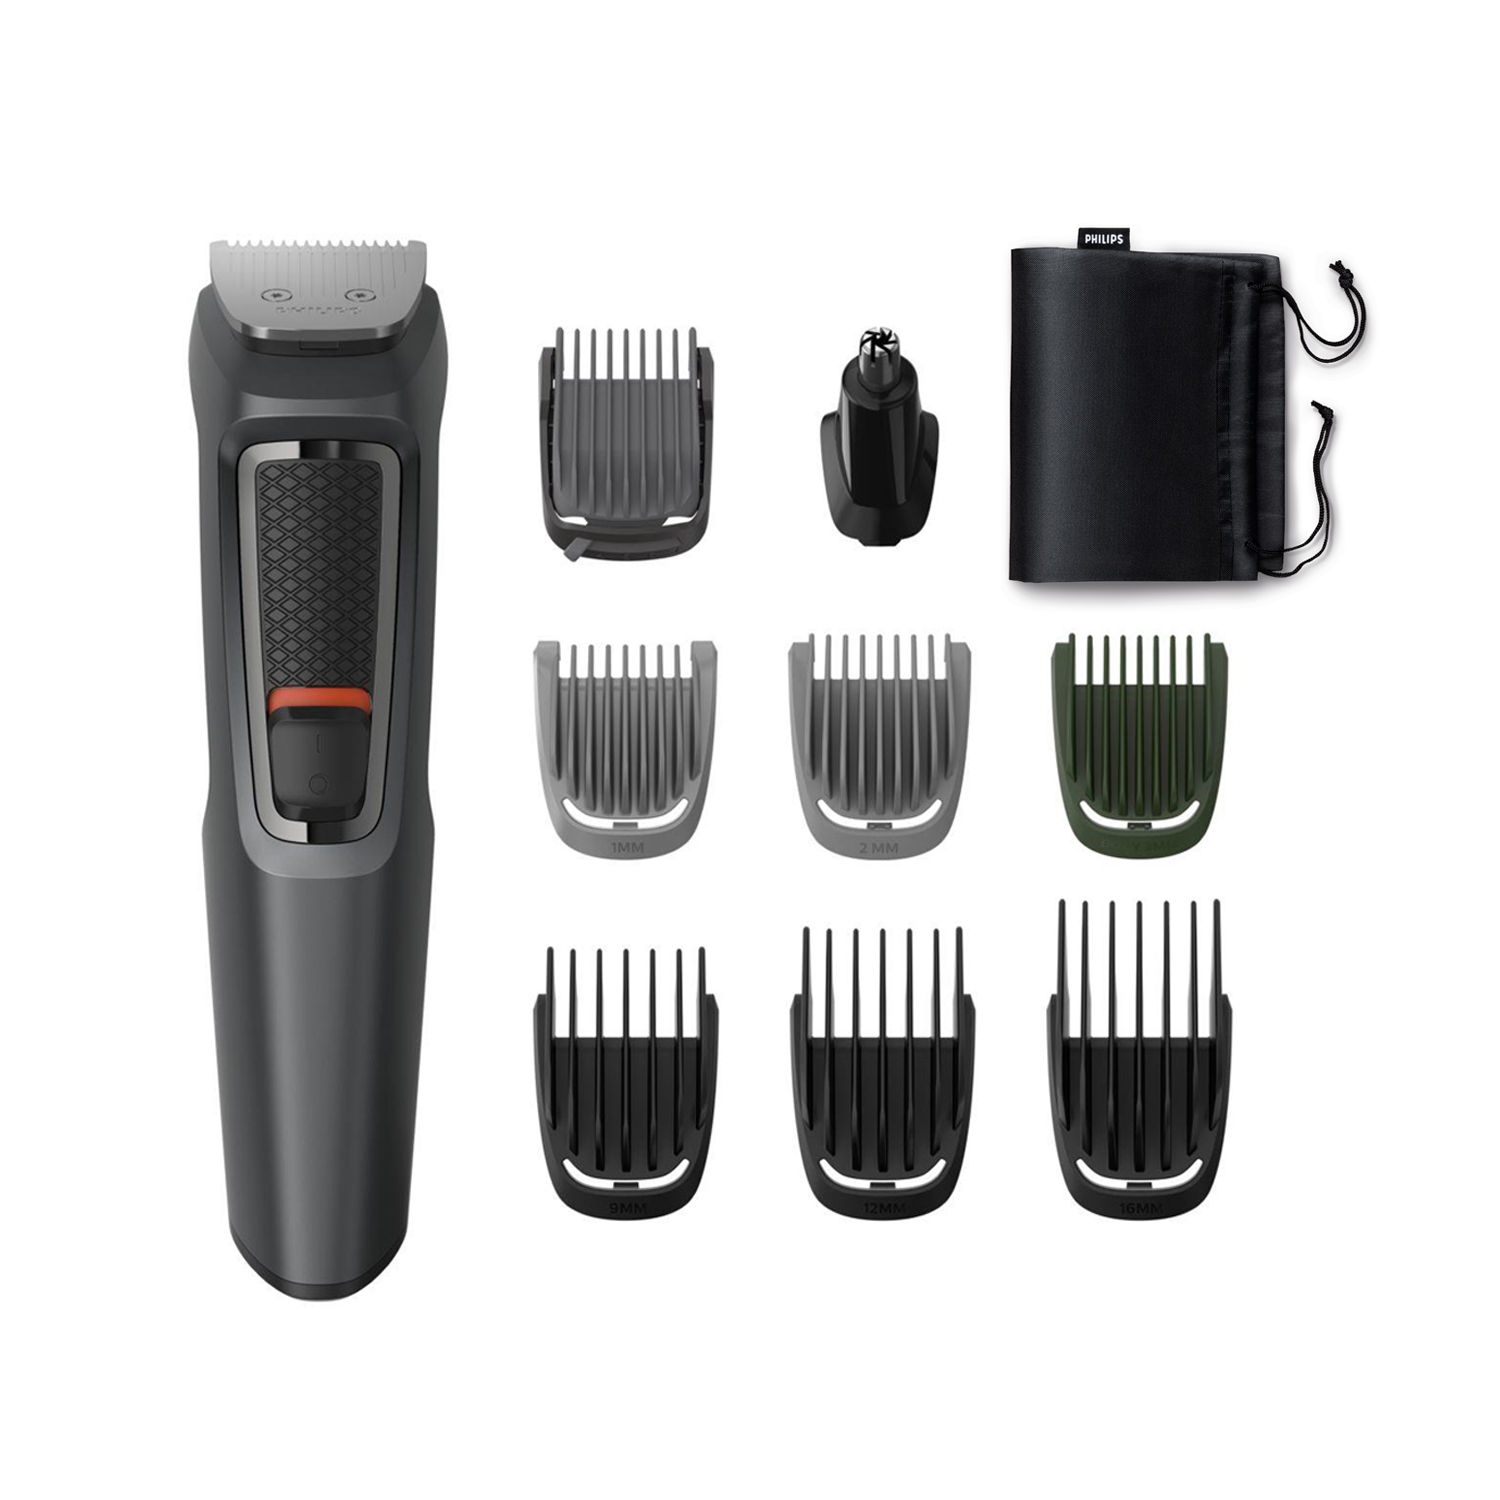 Philips Mg3747/15, 9-in-1, Face, Hair And Body - Multi Grooming Kit